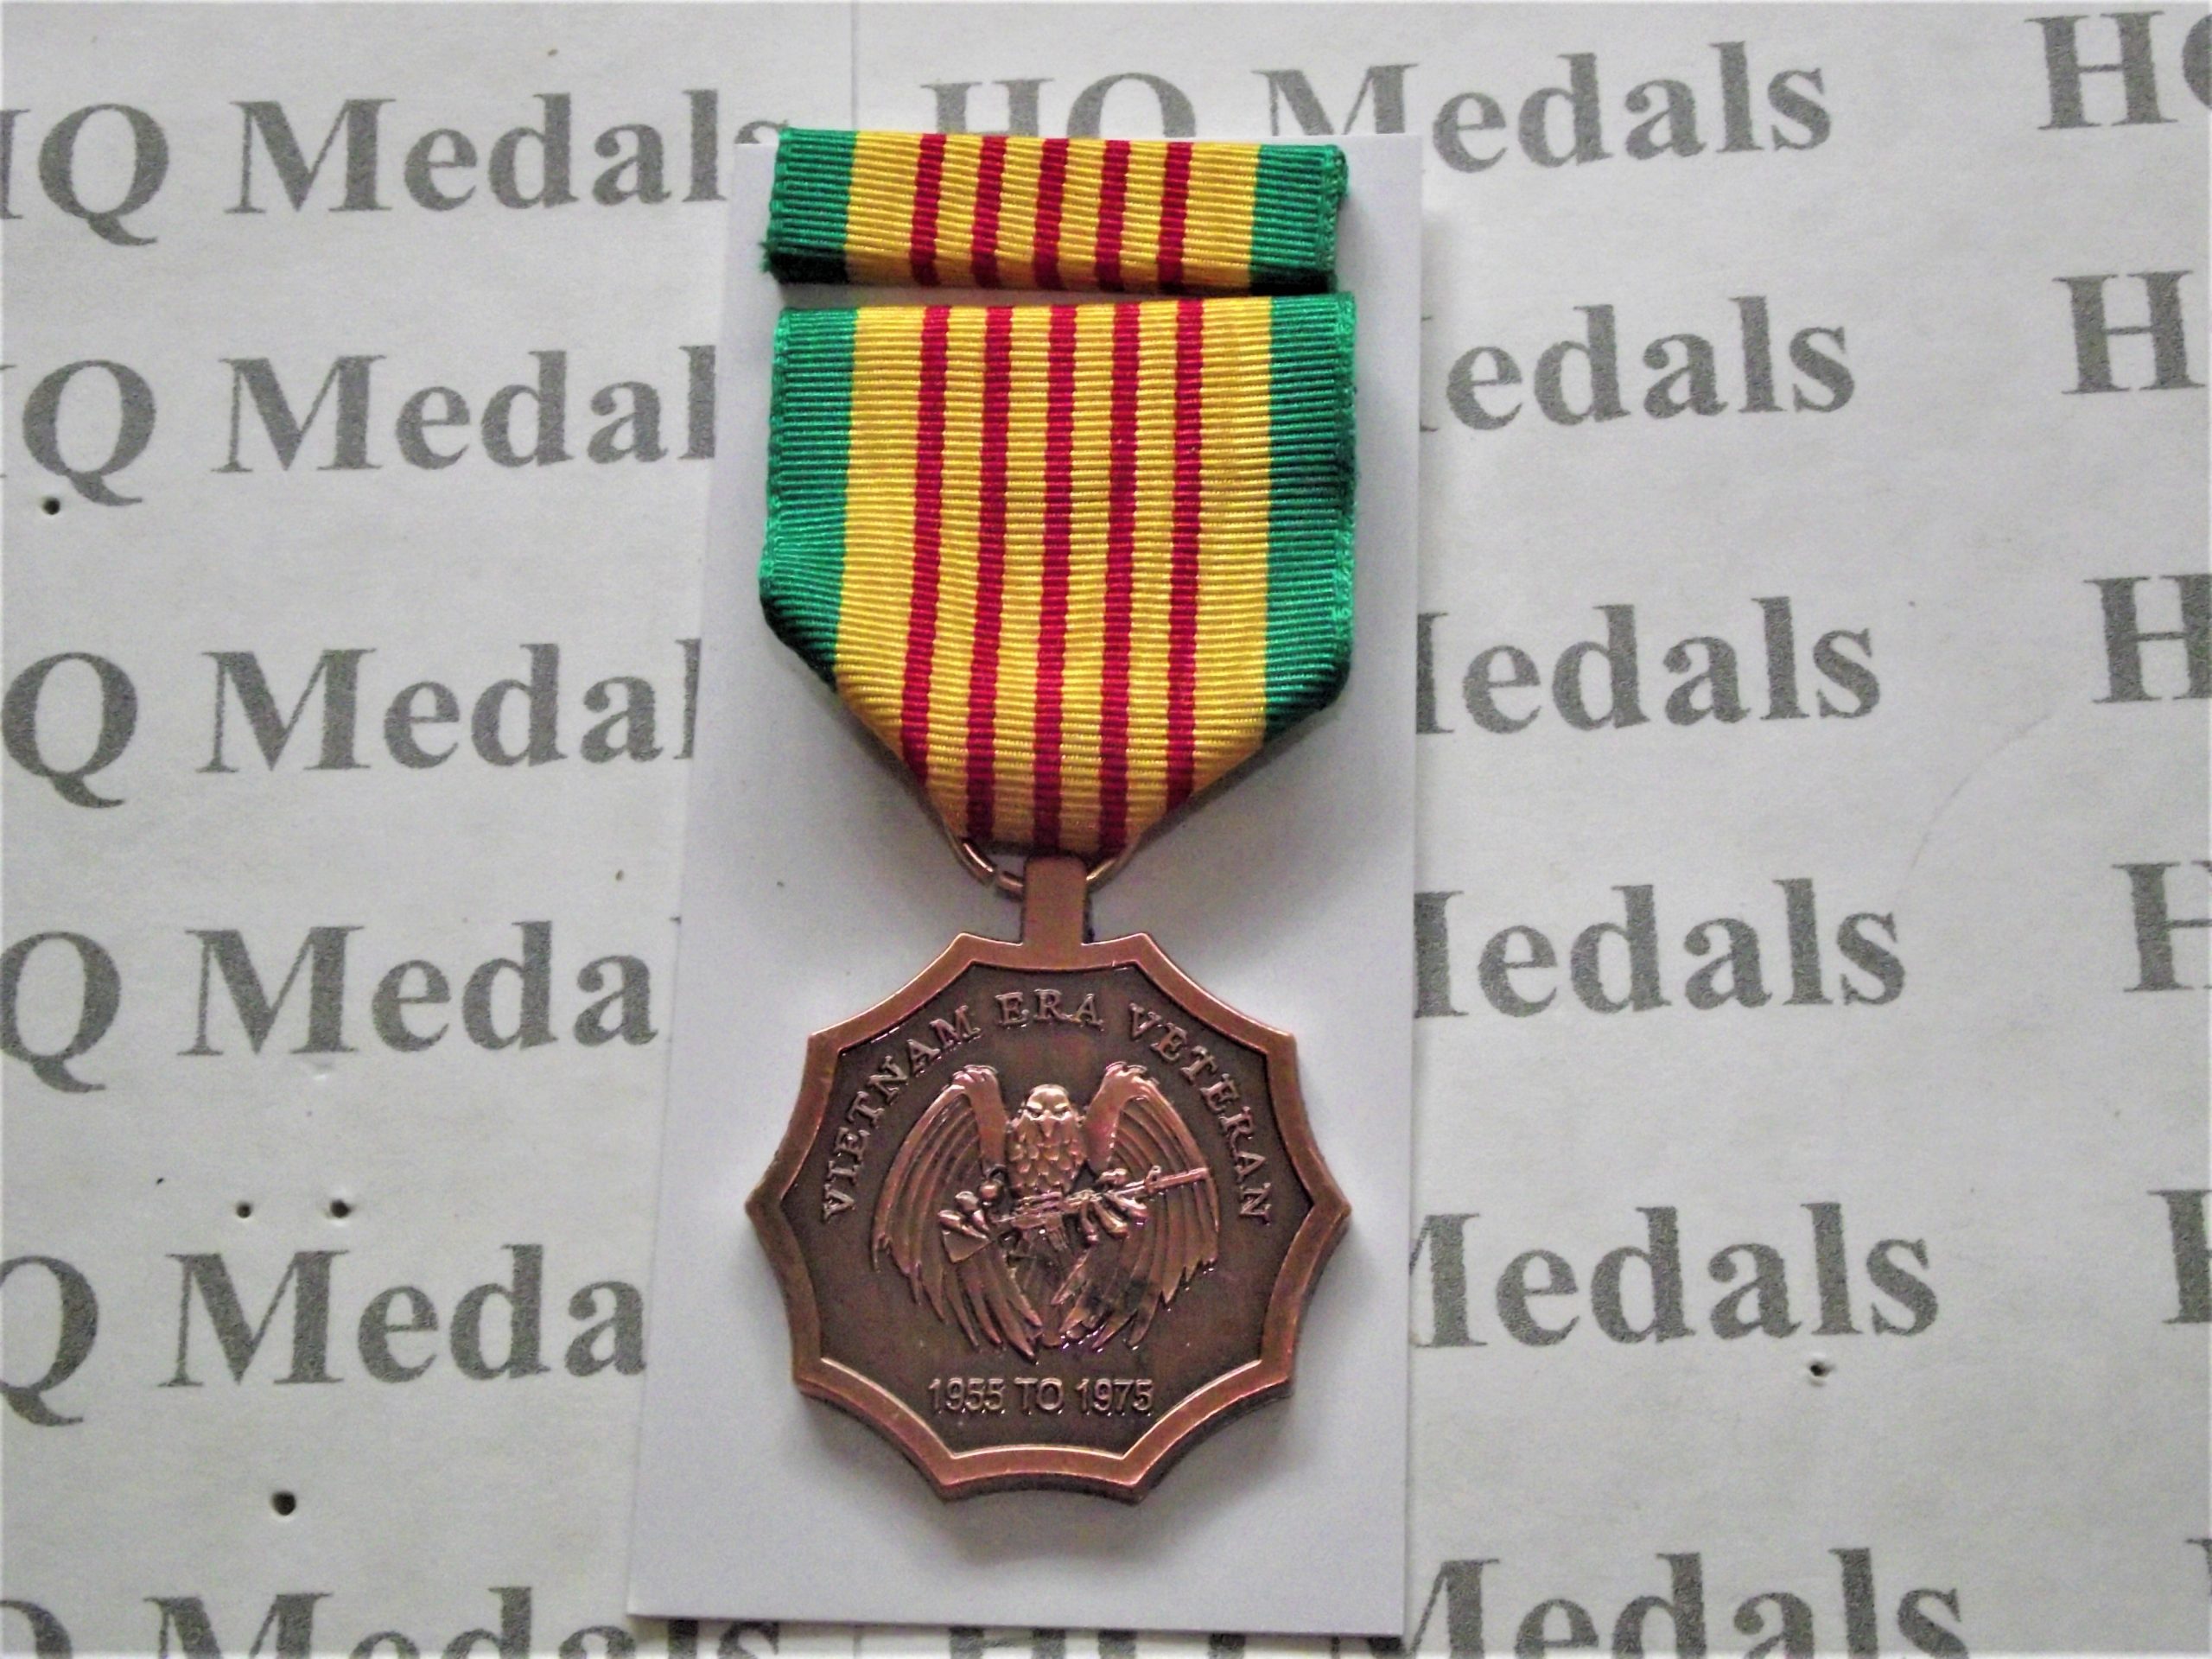 VIETNAM WAR SERVICE CAMPAIGN MEDAL RIBBON PATCH US ARMY NAVY AIR FORCE MARINES 